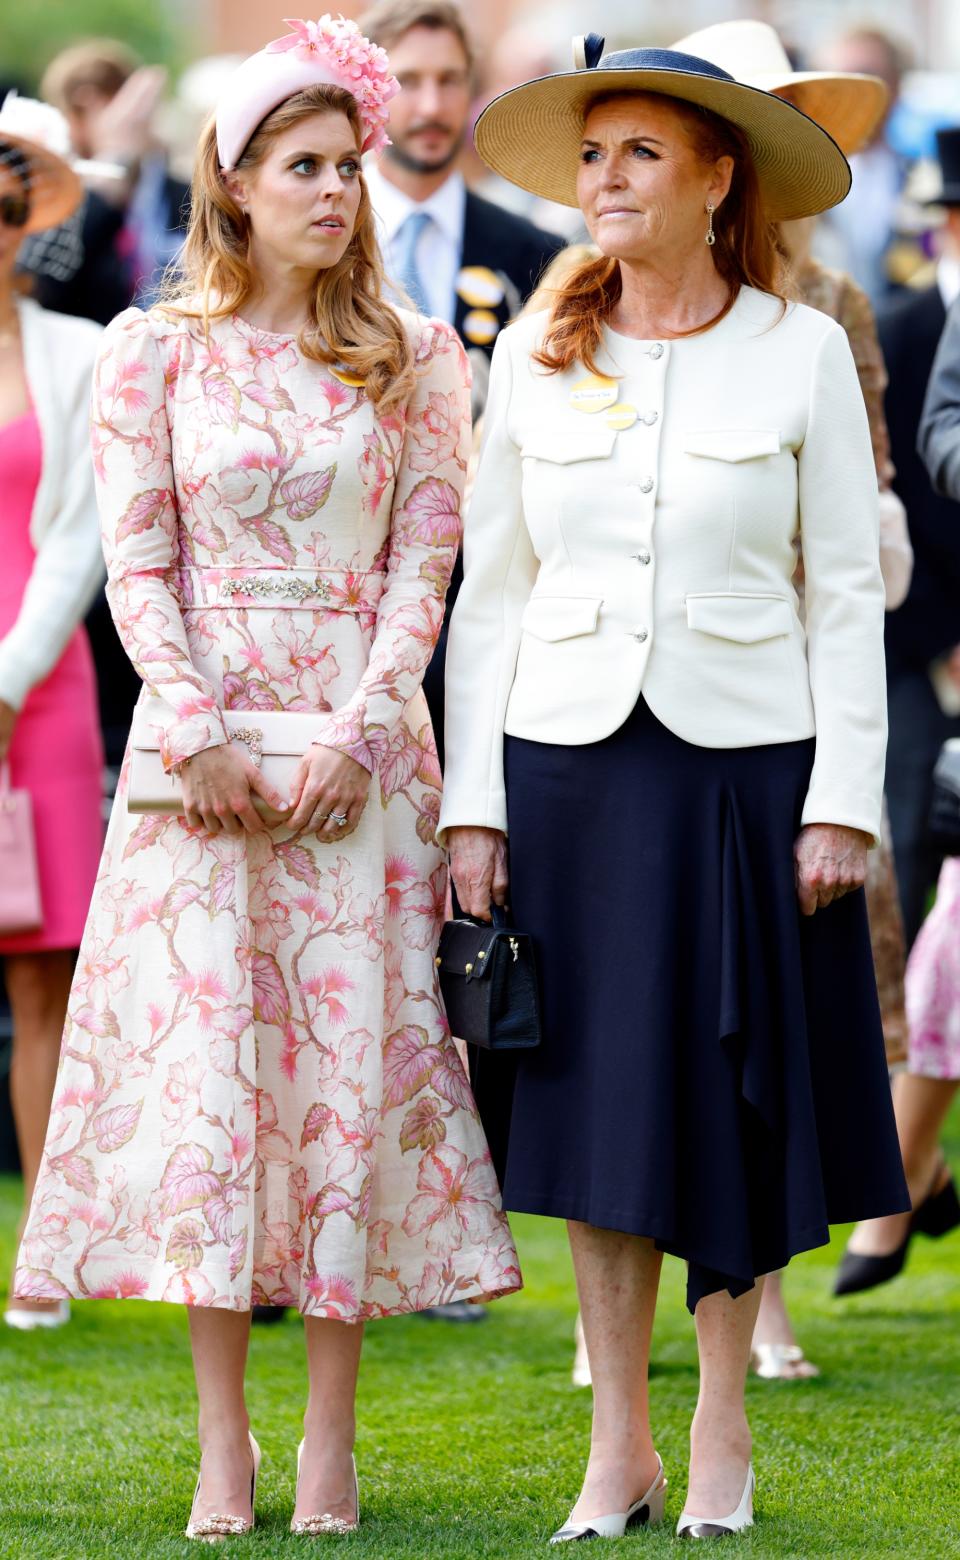 ASCOT, UNITED KINGDOM - JUNE 19: (EMBARGOED FOR PUBLICATION IN UK NEWSPAPERS UNTIL 24 HOURS AFTER CREATE DATE AND TIME) Princess Beatrice and Sarah Ferguson, Duchess of York attend day two of Royal Ascot 2024 at Ascot Racecourse on June 19, 2024 in Ascot, England. (Photo by Max Mumby/Indigo/Getty Images)